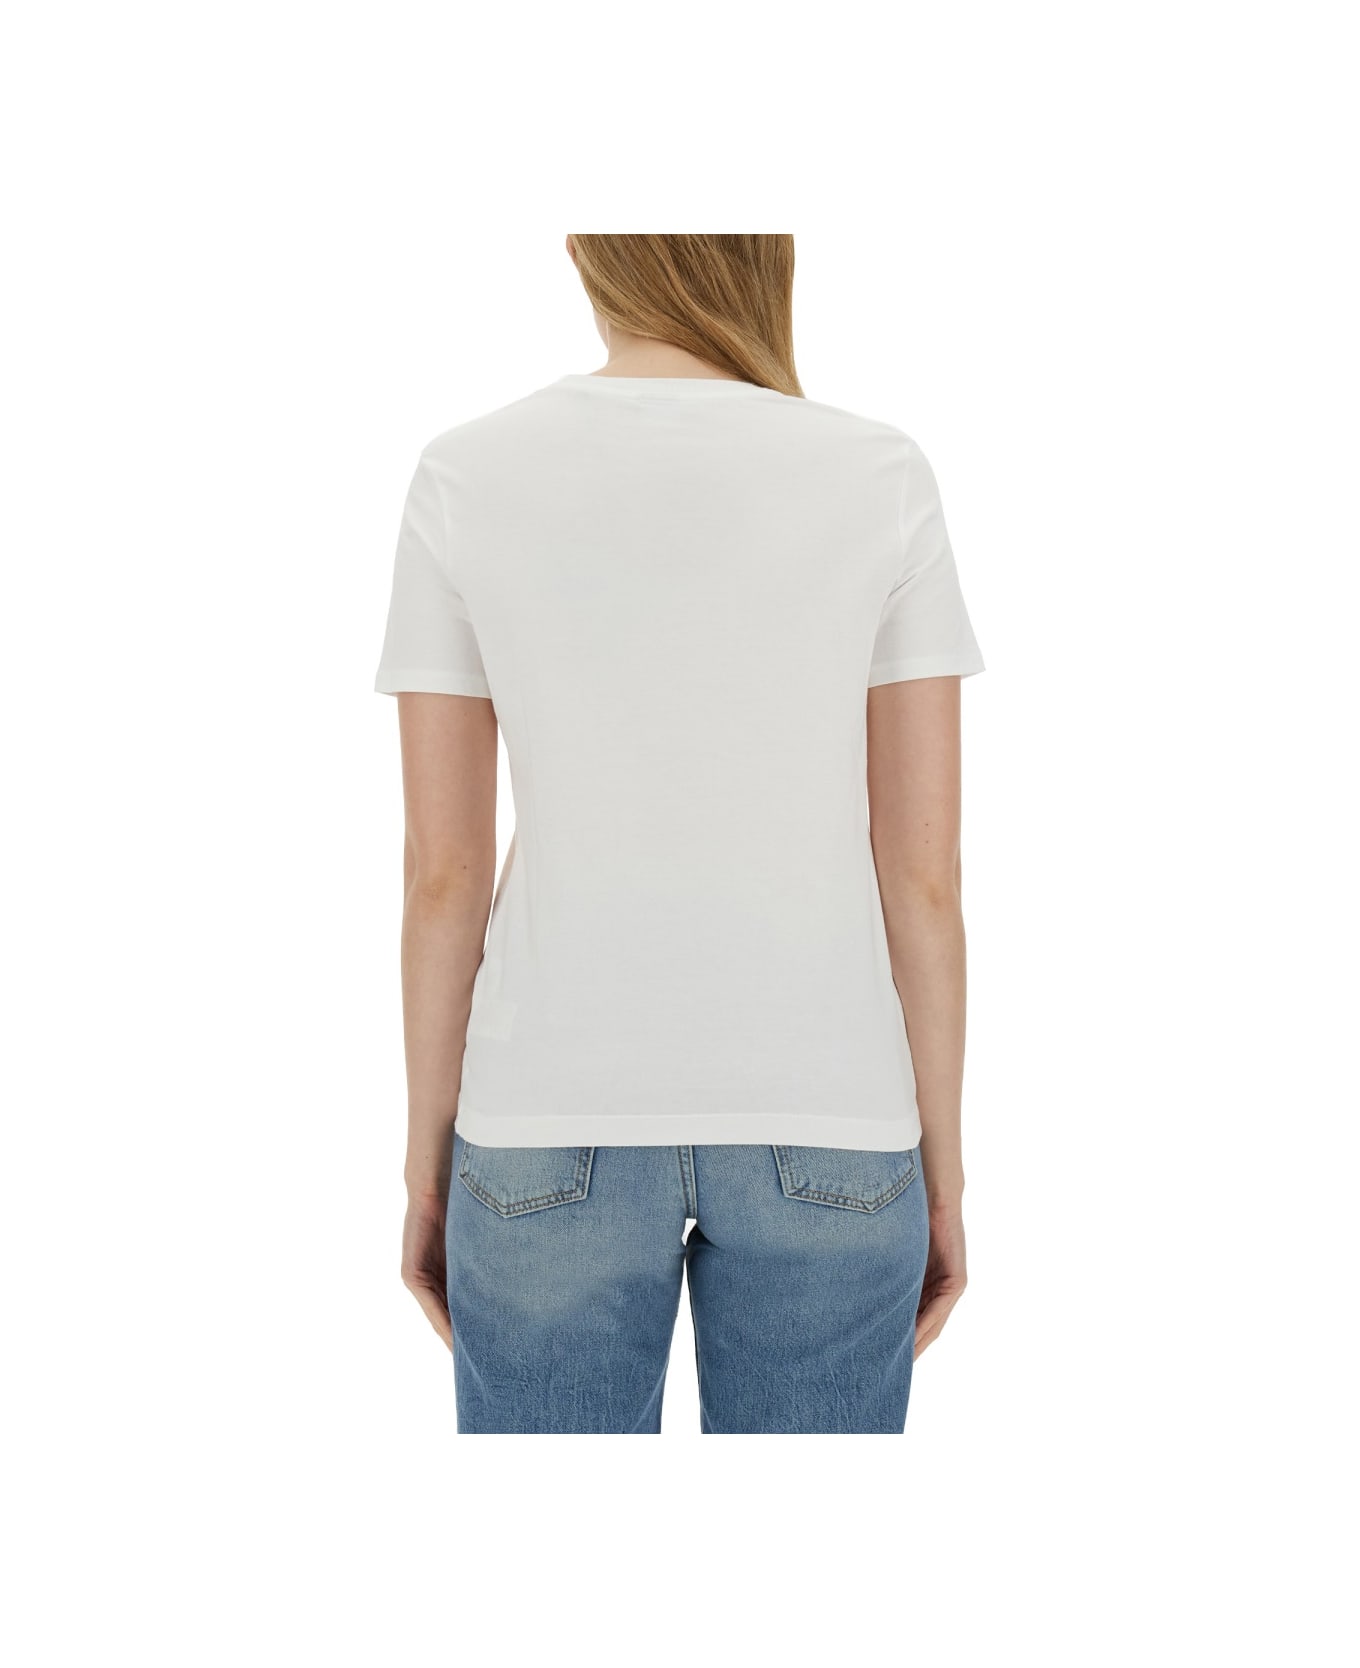 PS by Paul Smith Daisy T-shirt - WHITE